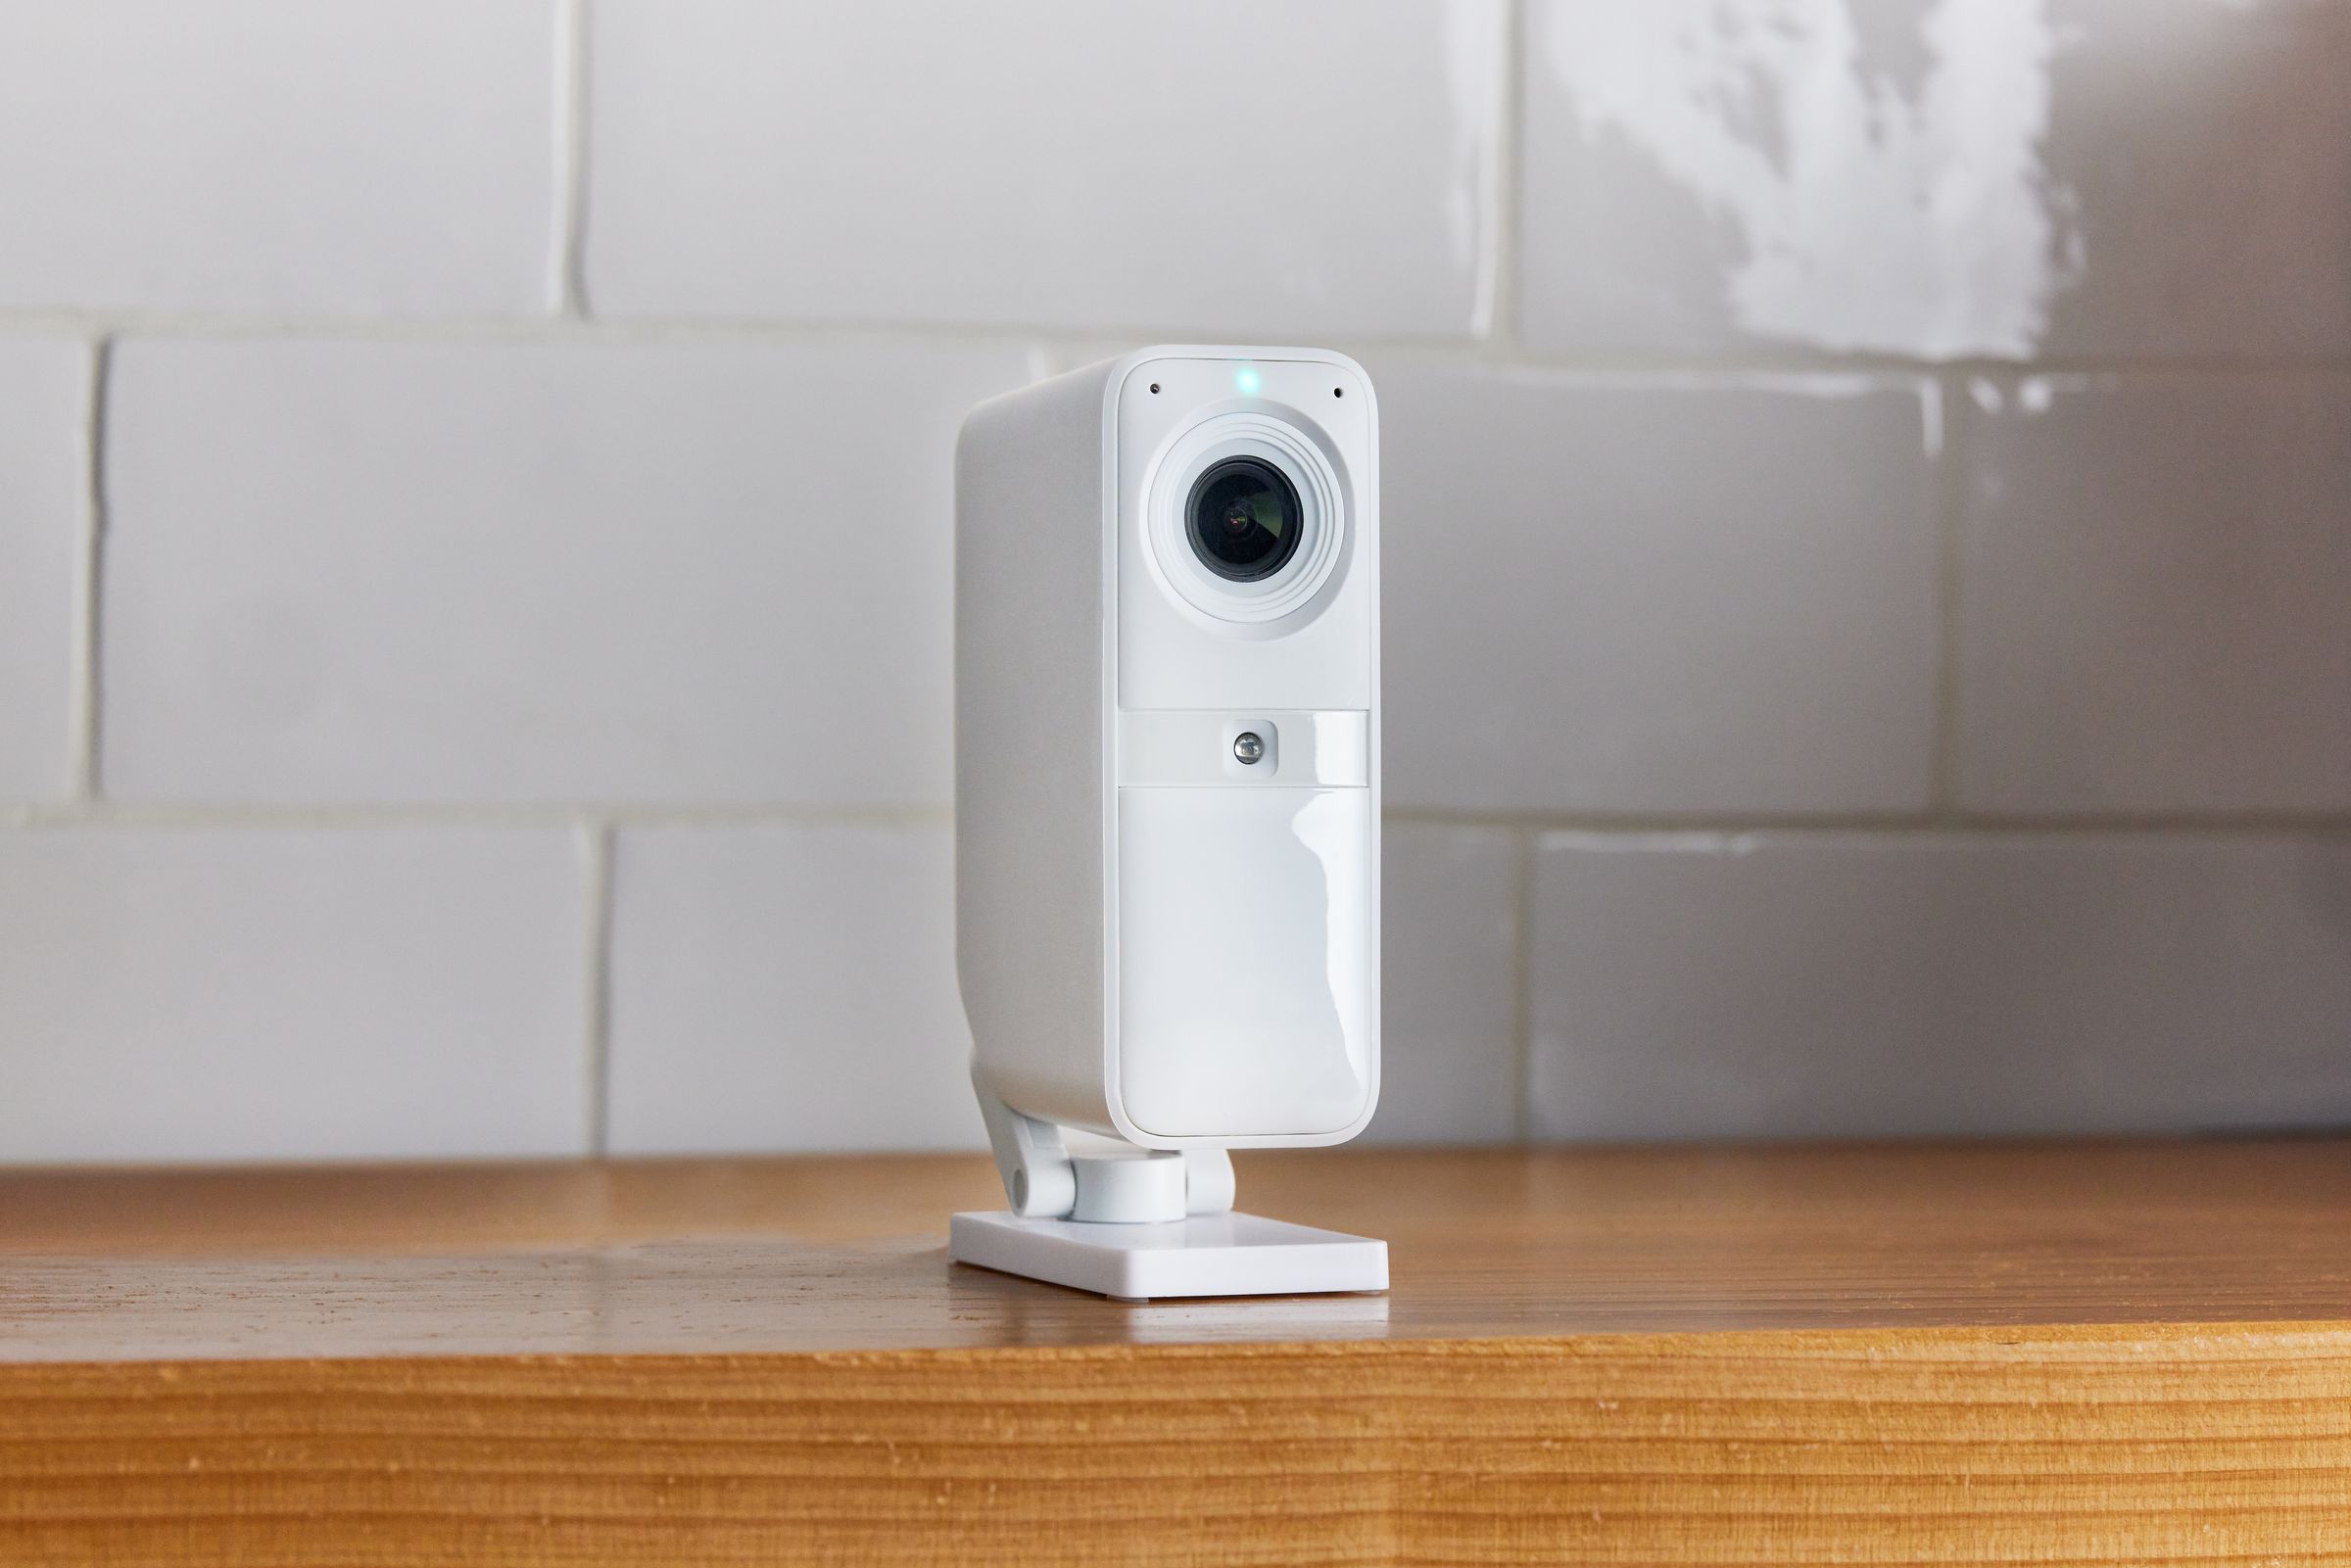 The new SmartAlarm camera has a mechanical privacy shutter and captures 1536 x 1536p HD video. The internal battery lasts up to 3 months and can be powered or charged with a micro USB cable.